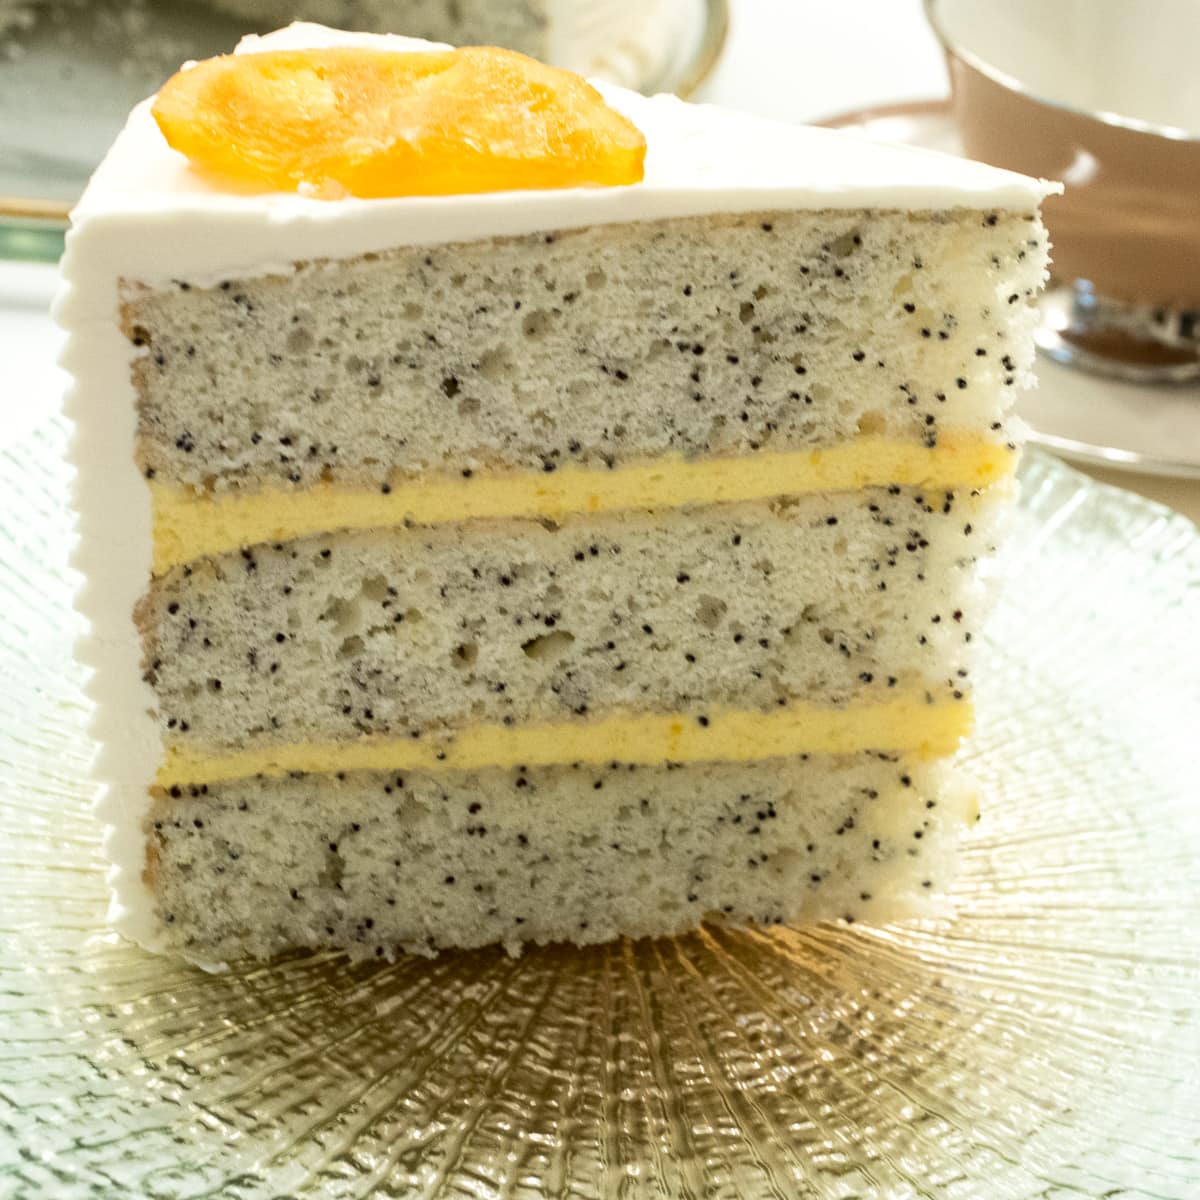 A sour cream cake laden with poppyseeds filled with orange curd and finished white chocolate buttercream